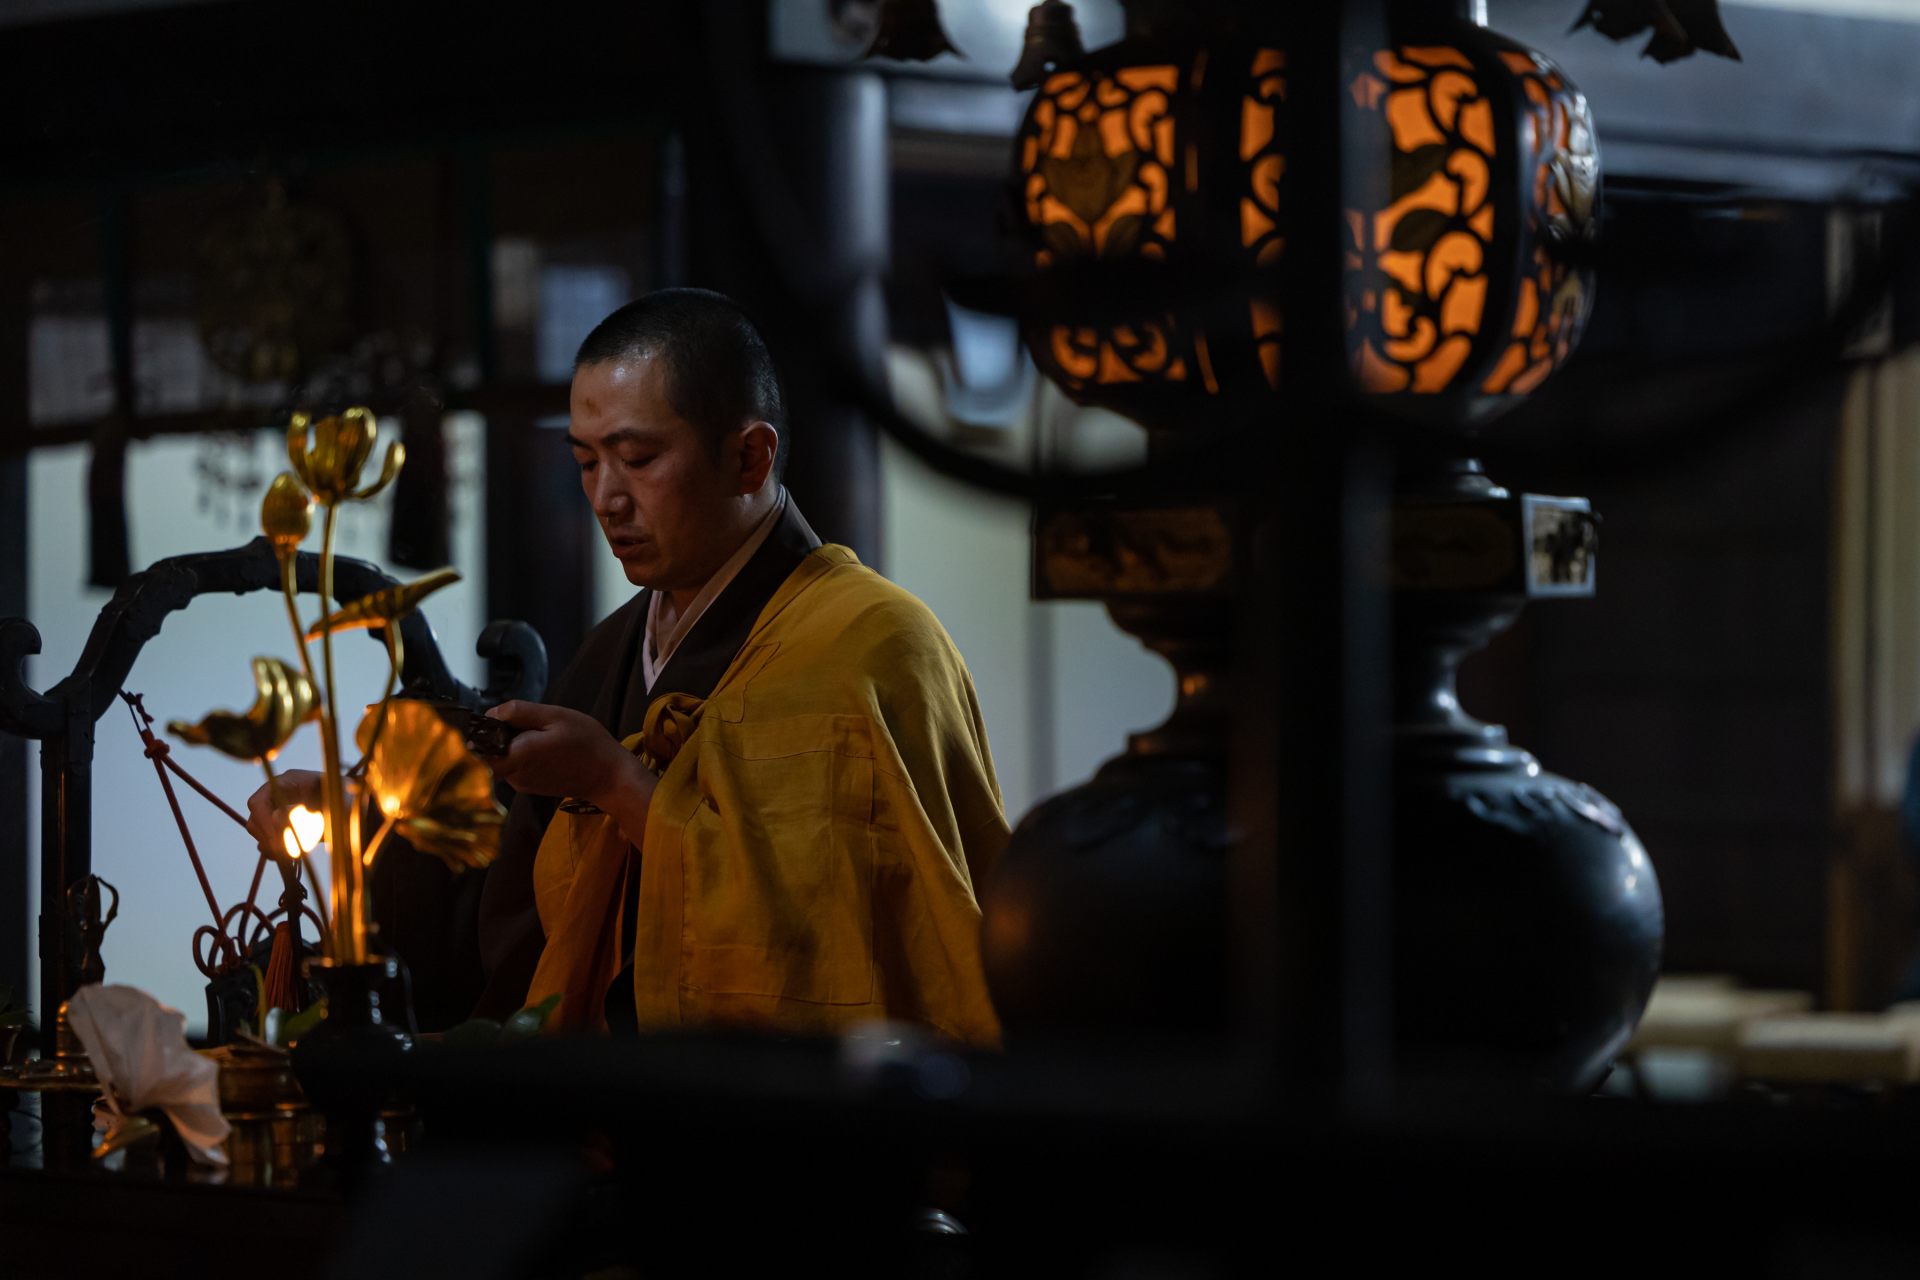 Esoteric Buddhist rituals performed by priests during a scripture reading service. It is said that with repetition of the process, priests get closer to becoming one with Buddha.